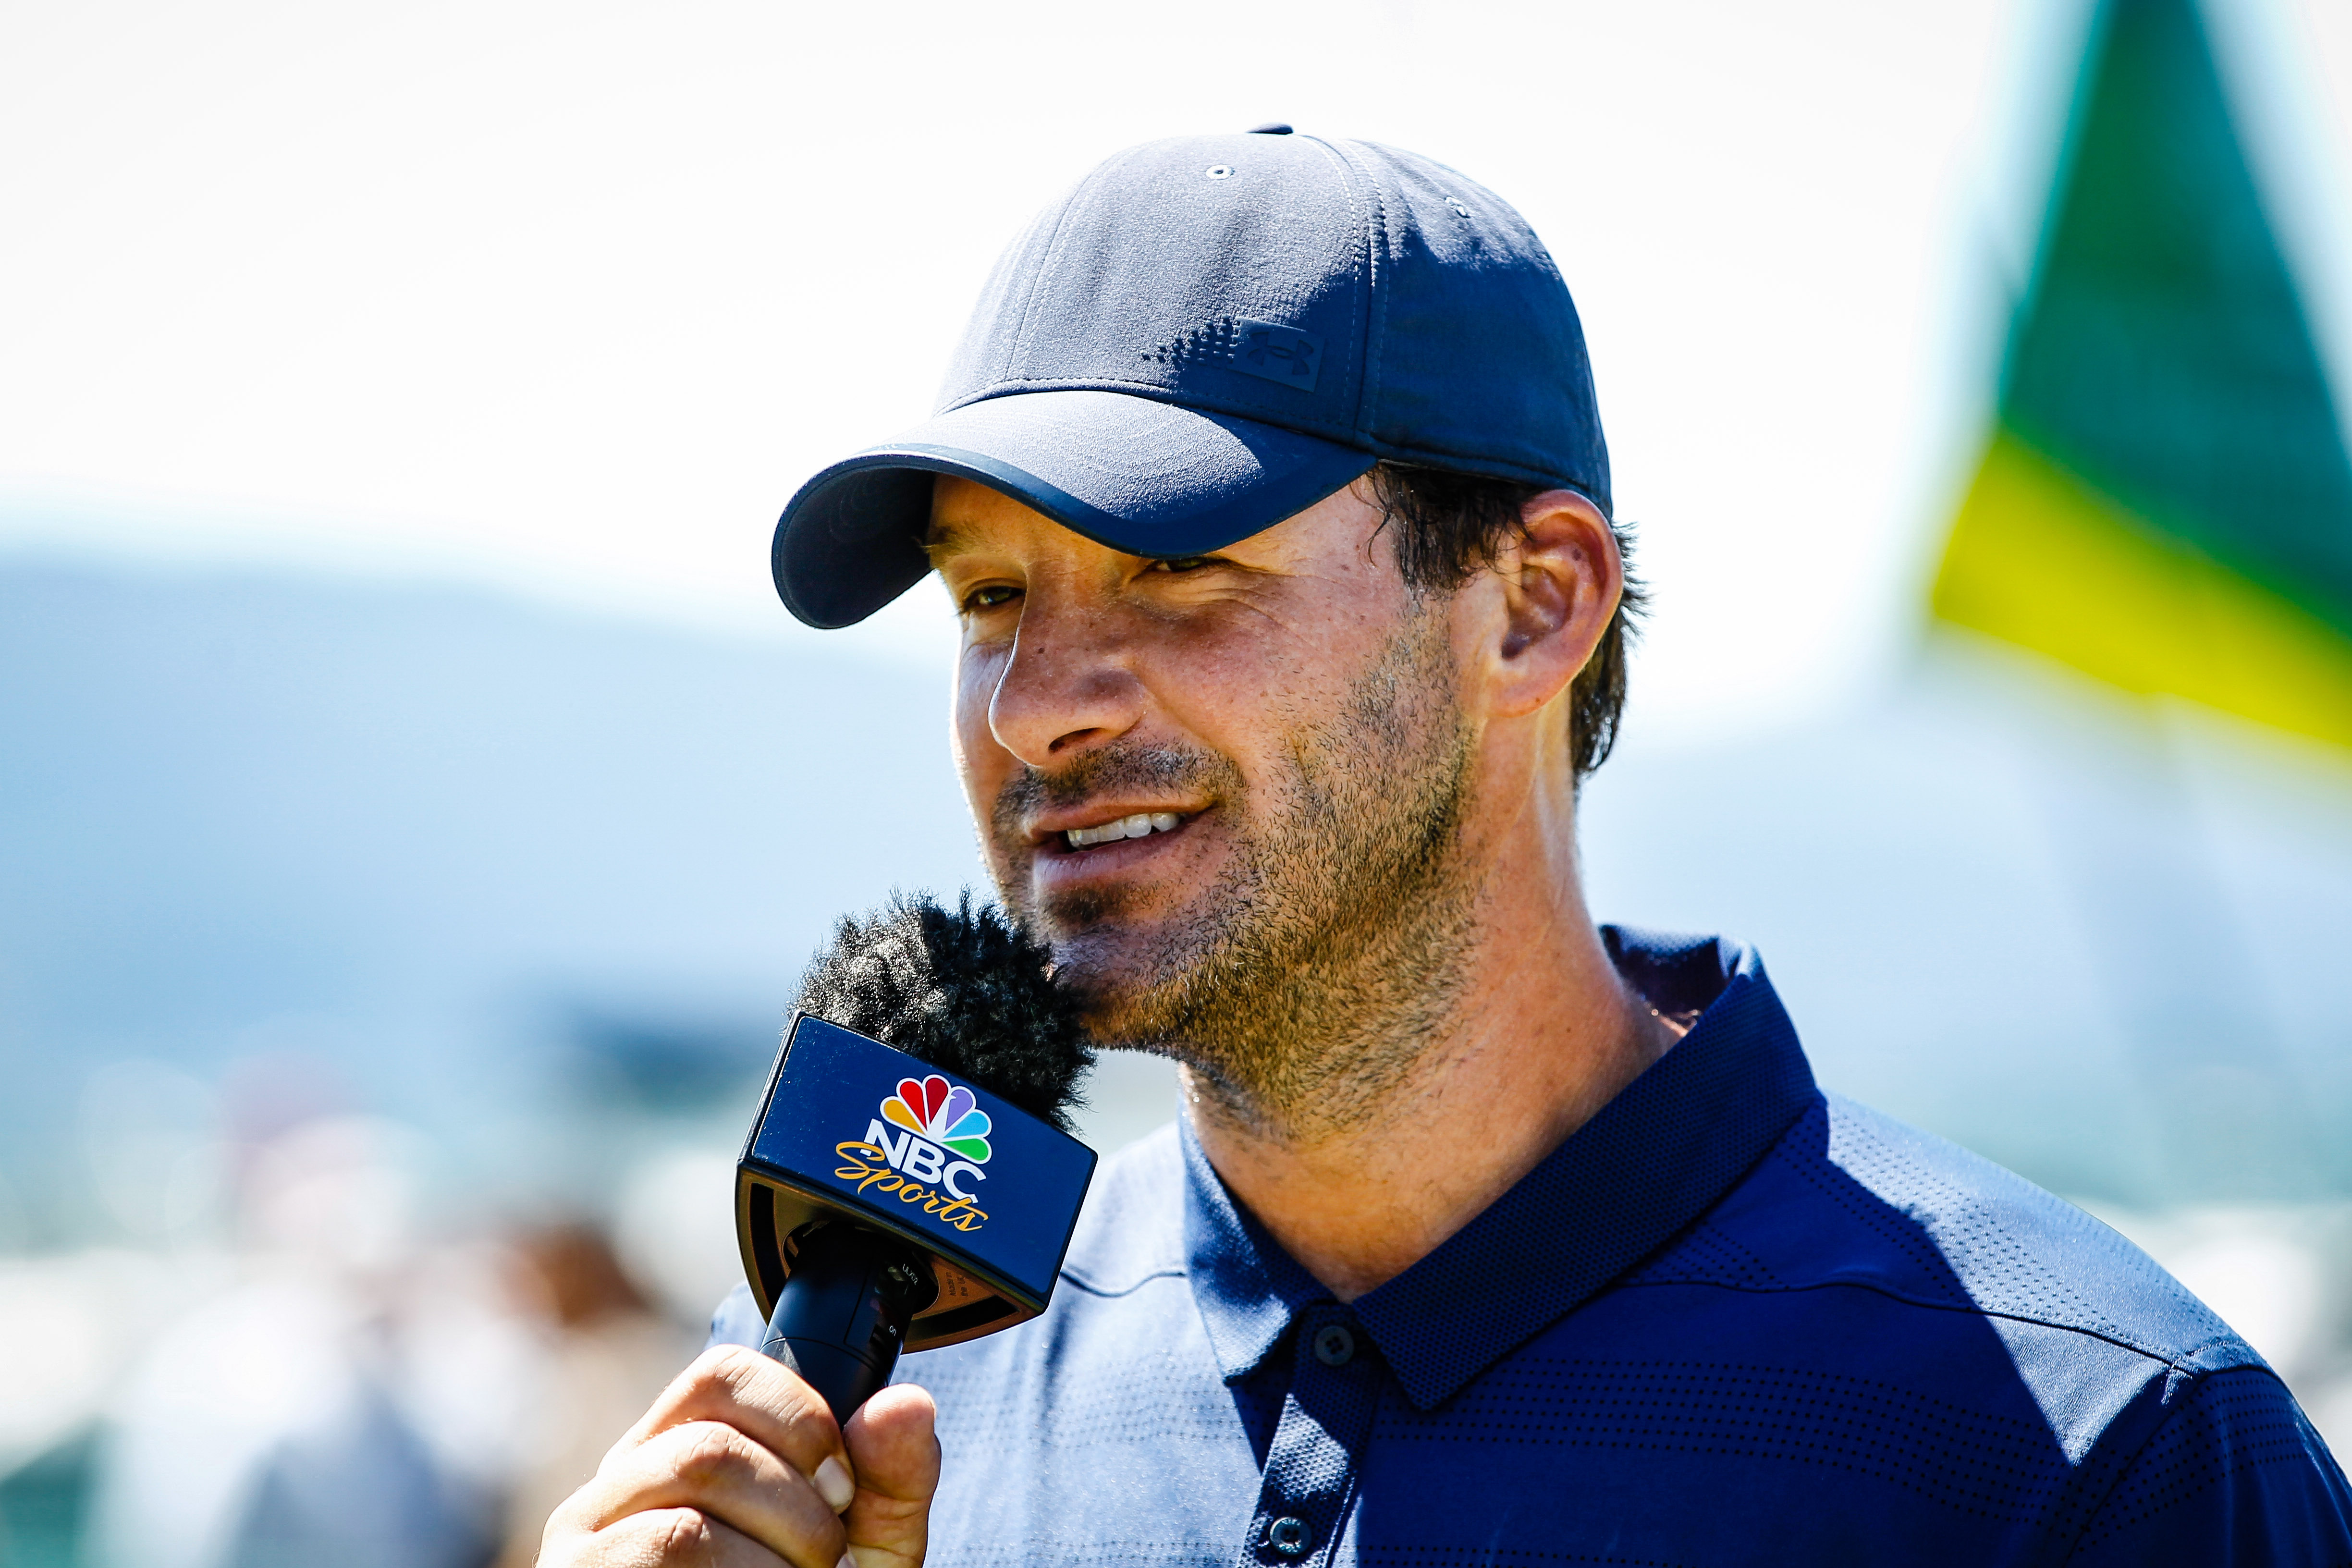 Tony Romo Had to Finish Broadcast Boot Camp Before Announcing Even Though Jim Nantz Said ‘It Was a Waste of Time’